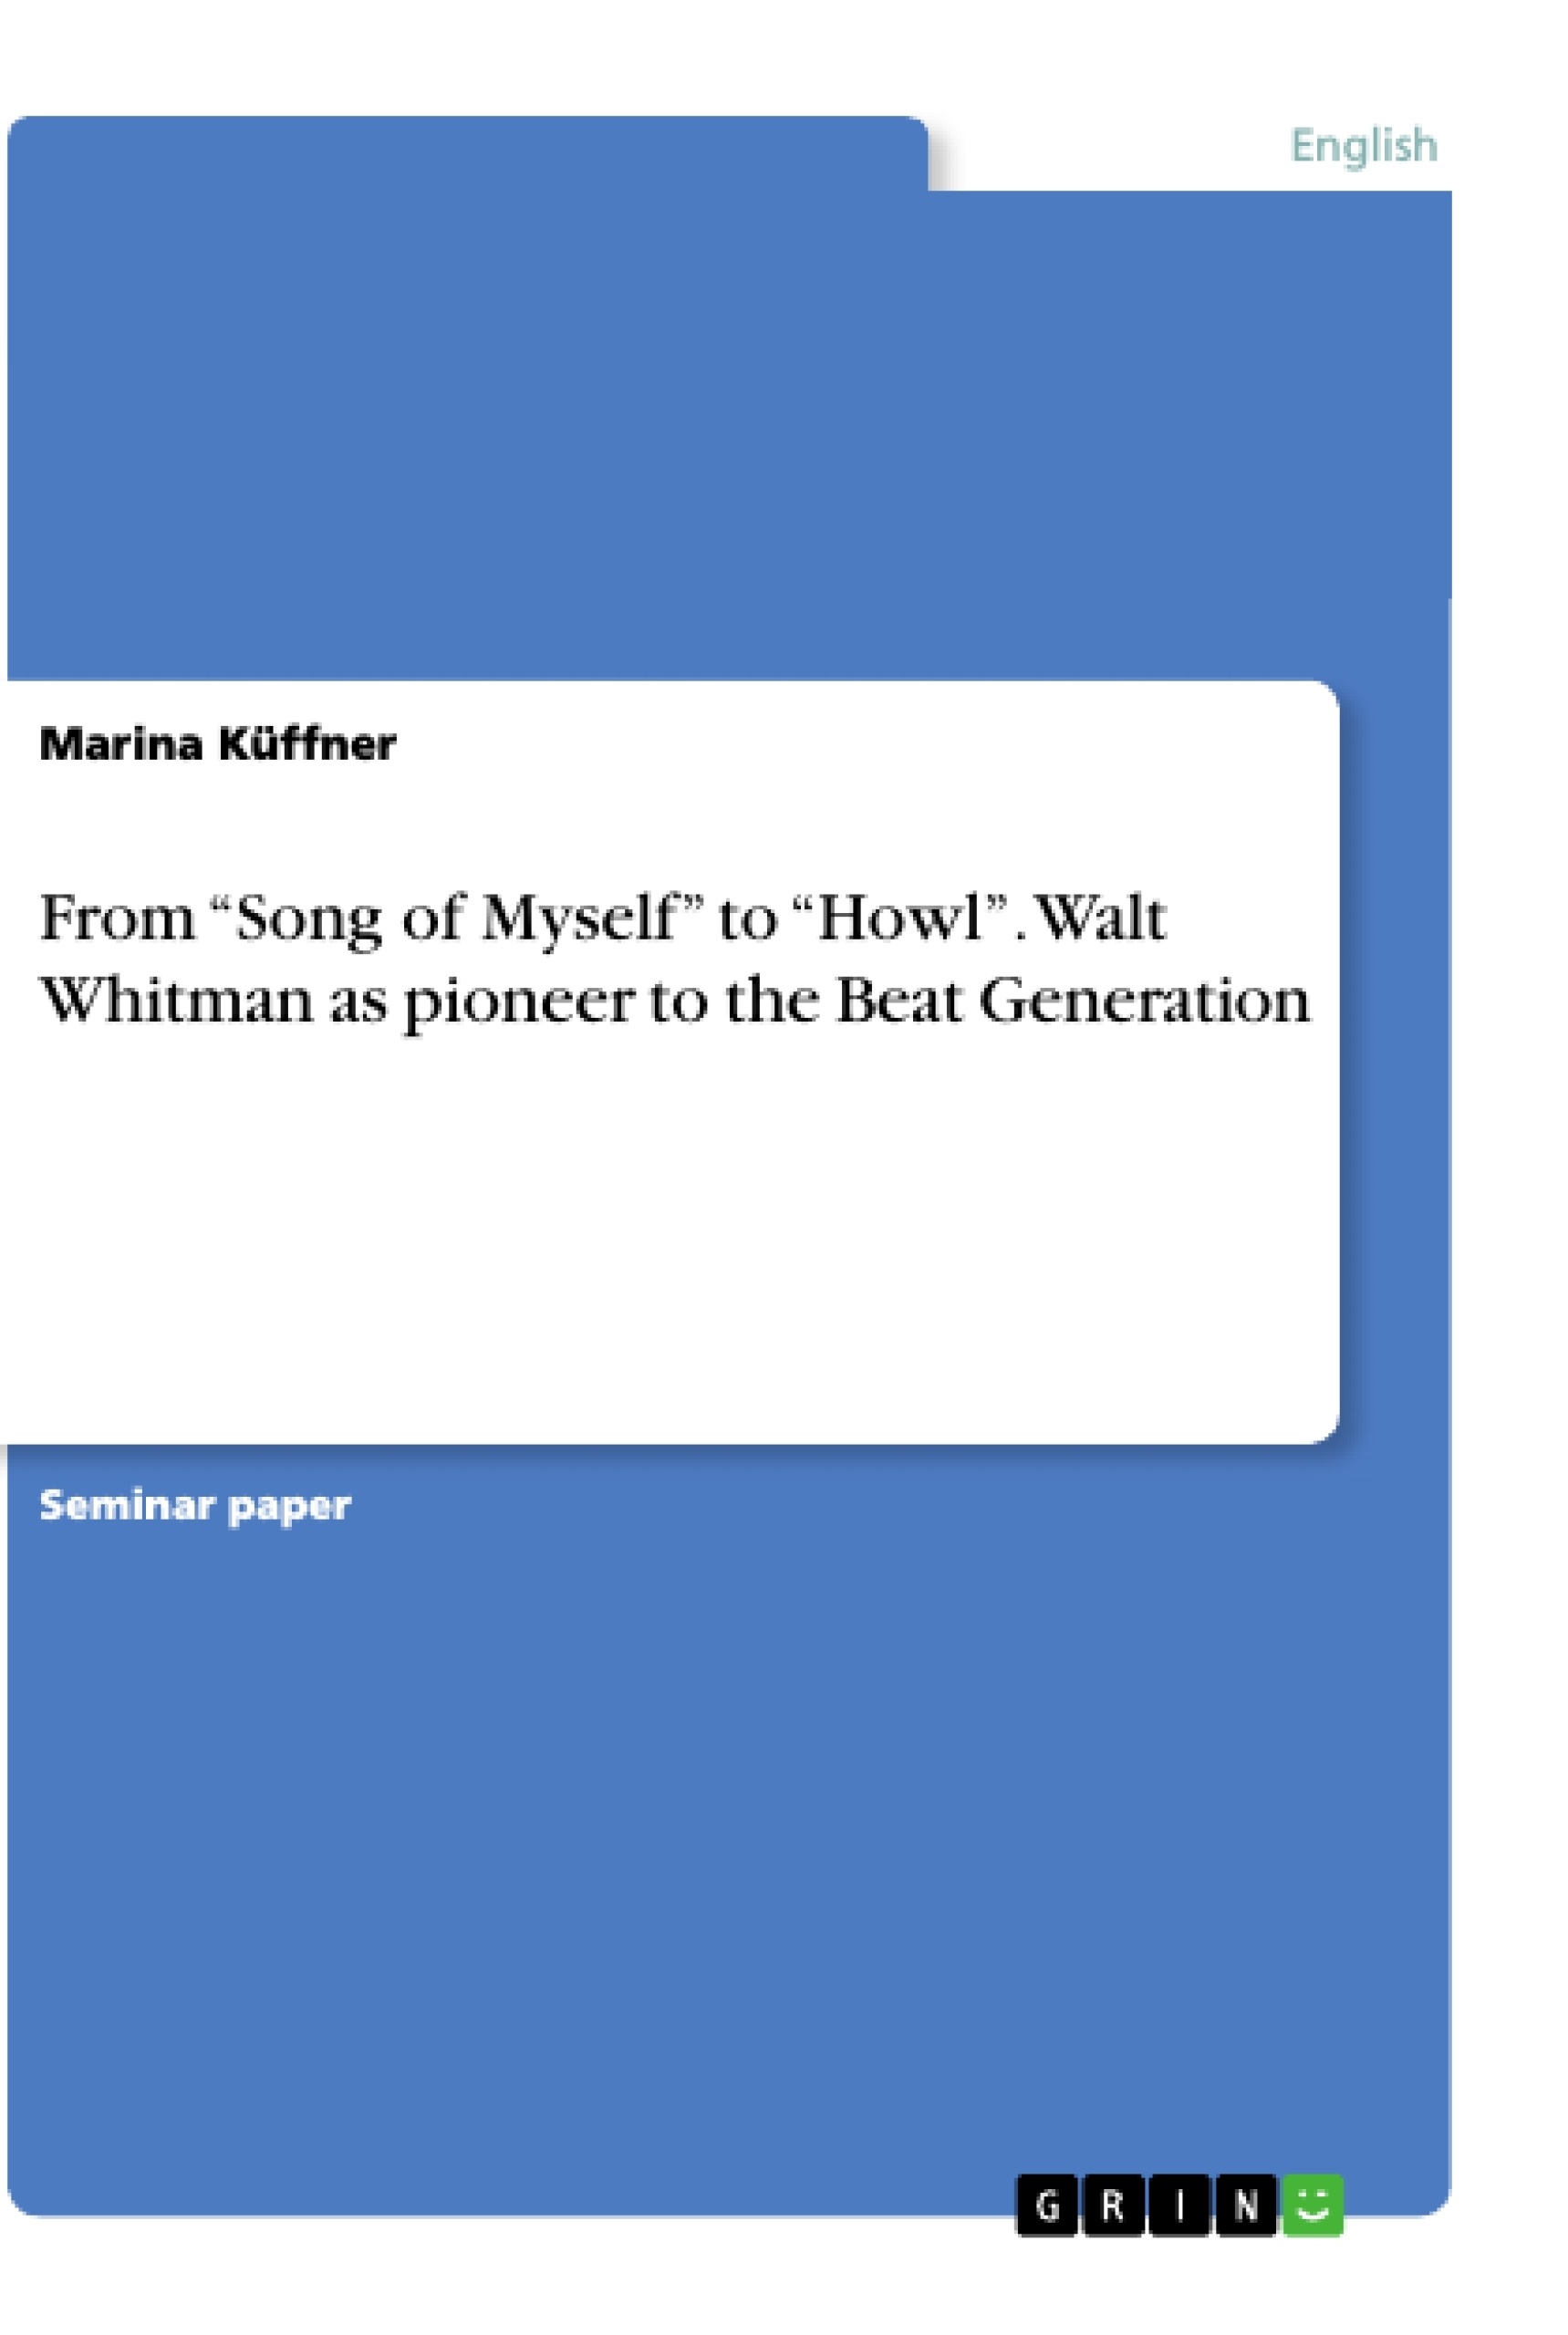 Title: From “Song of Myself” to “Howl”. Walt Whitman as pioneer to the Beat Generation